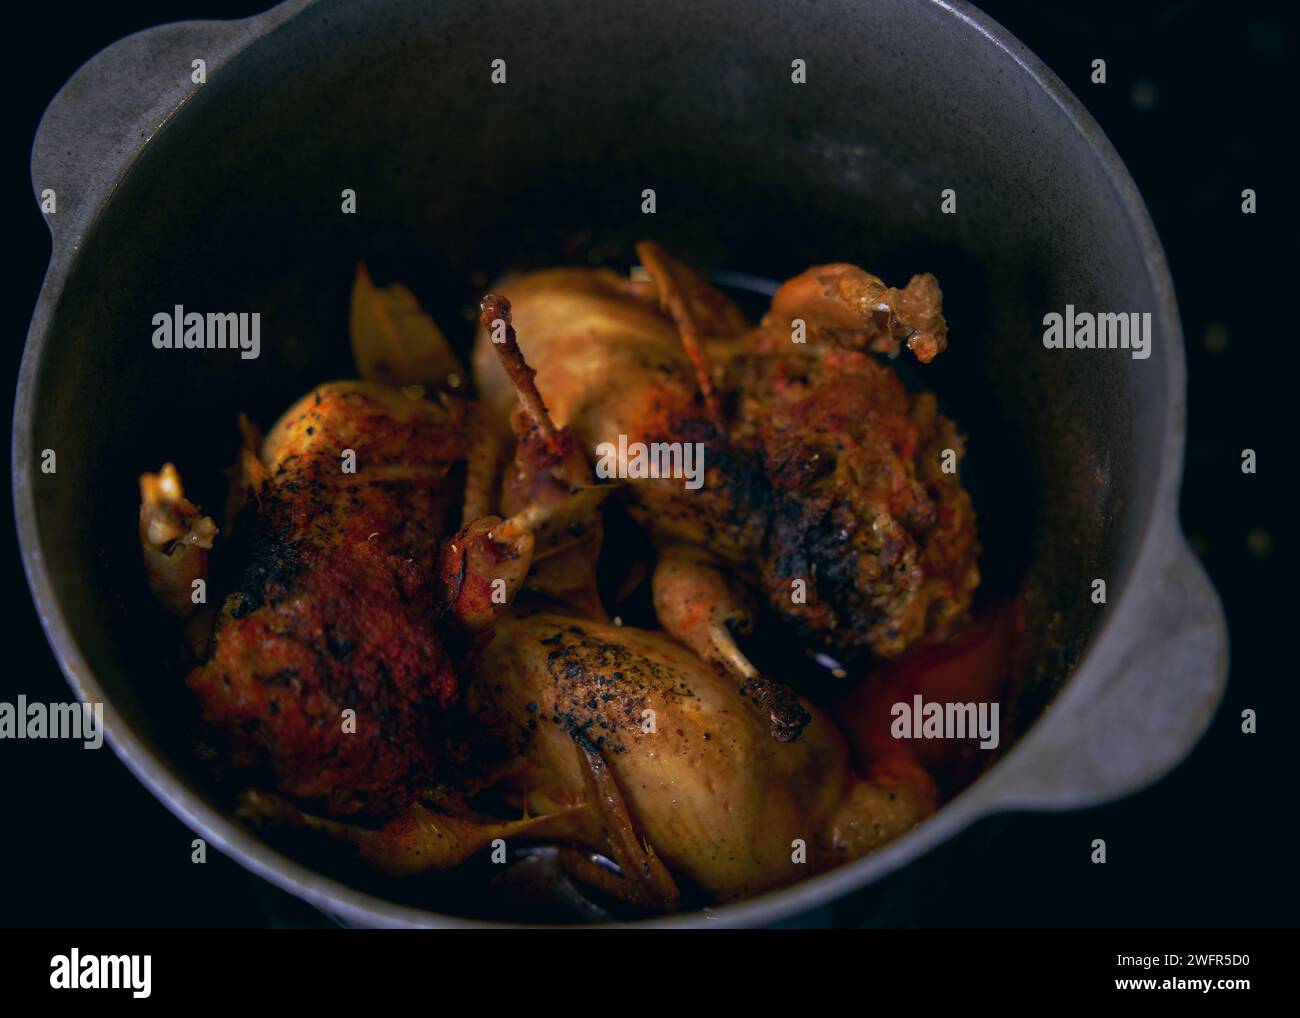 Quails stuffed with giblets and cooked in a cast iron cauldron Stock Photo